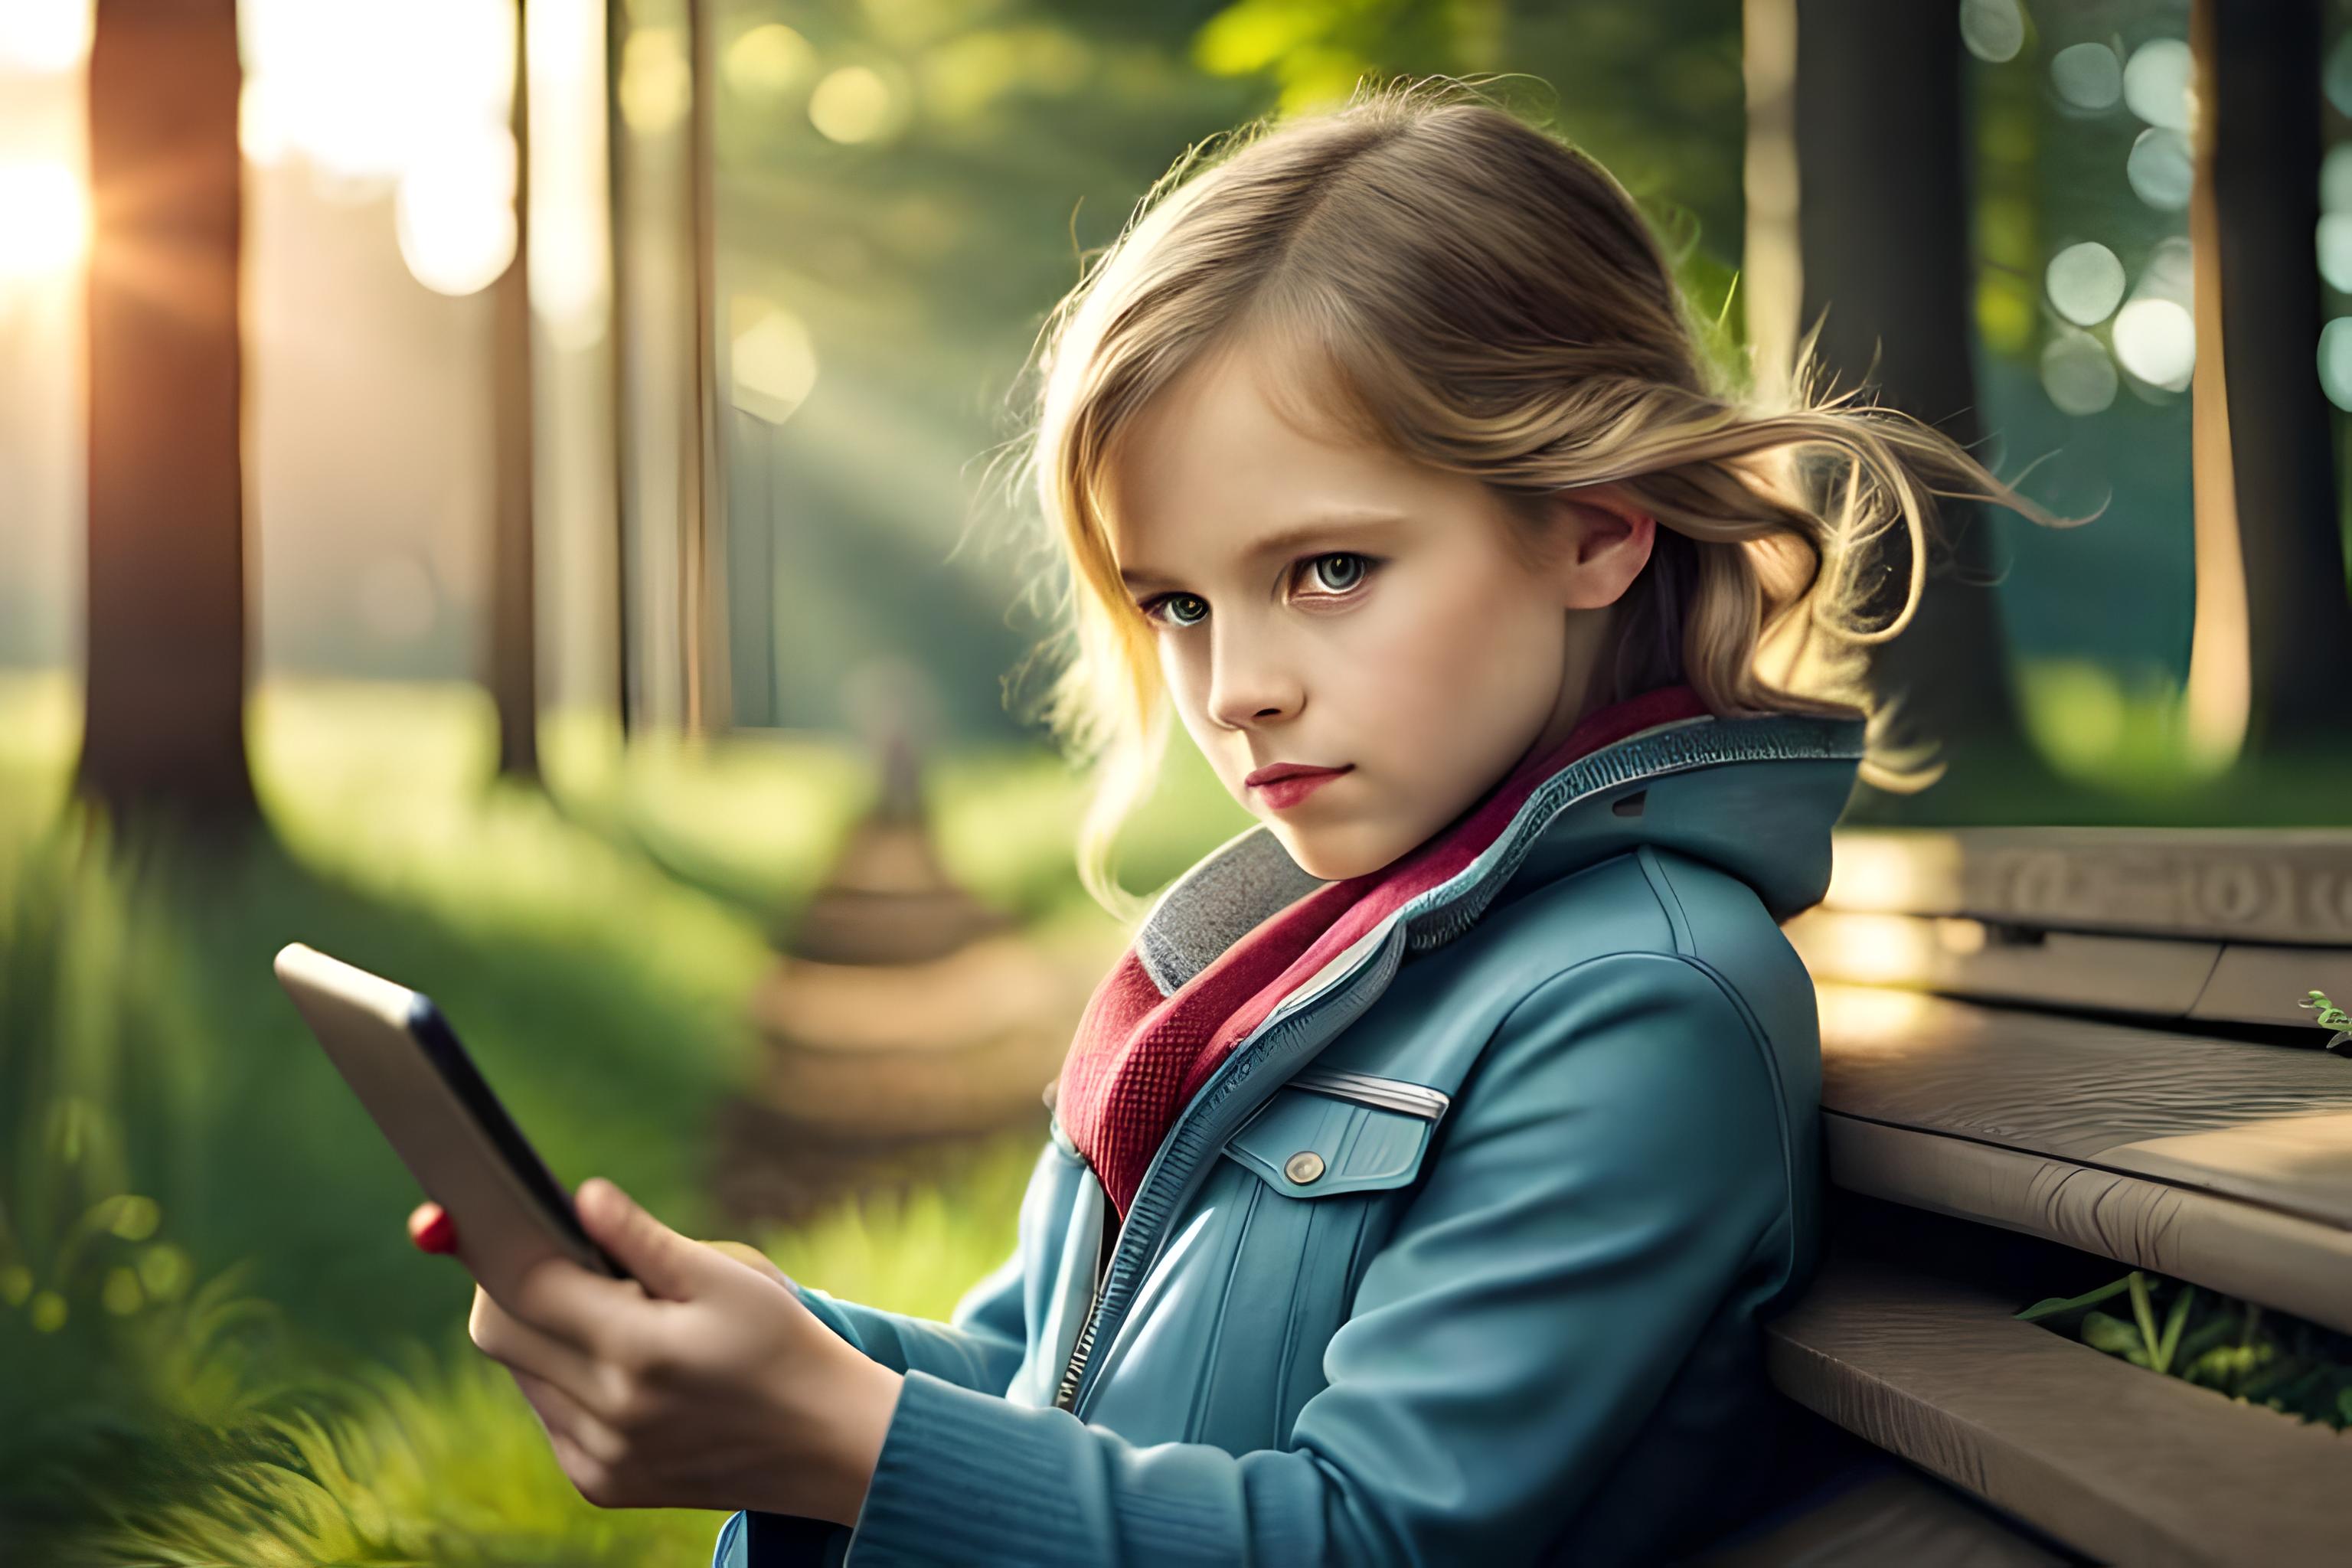 10 ways to get your kids unplugged from devices and outside - 4aKid